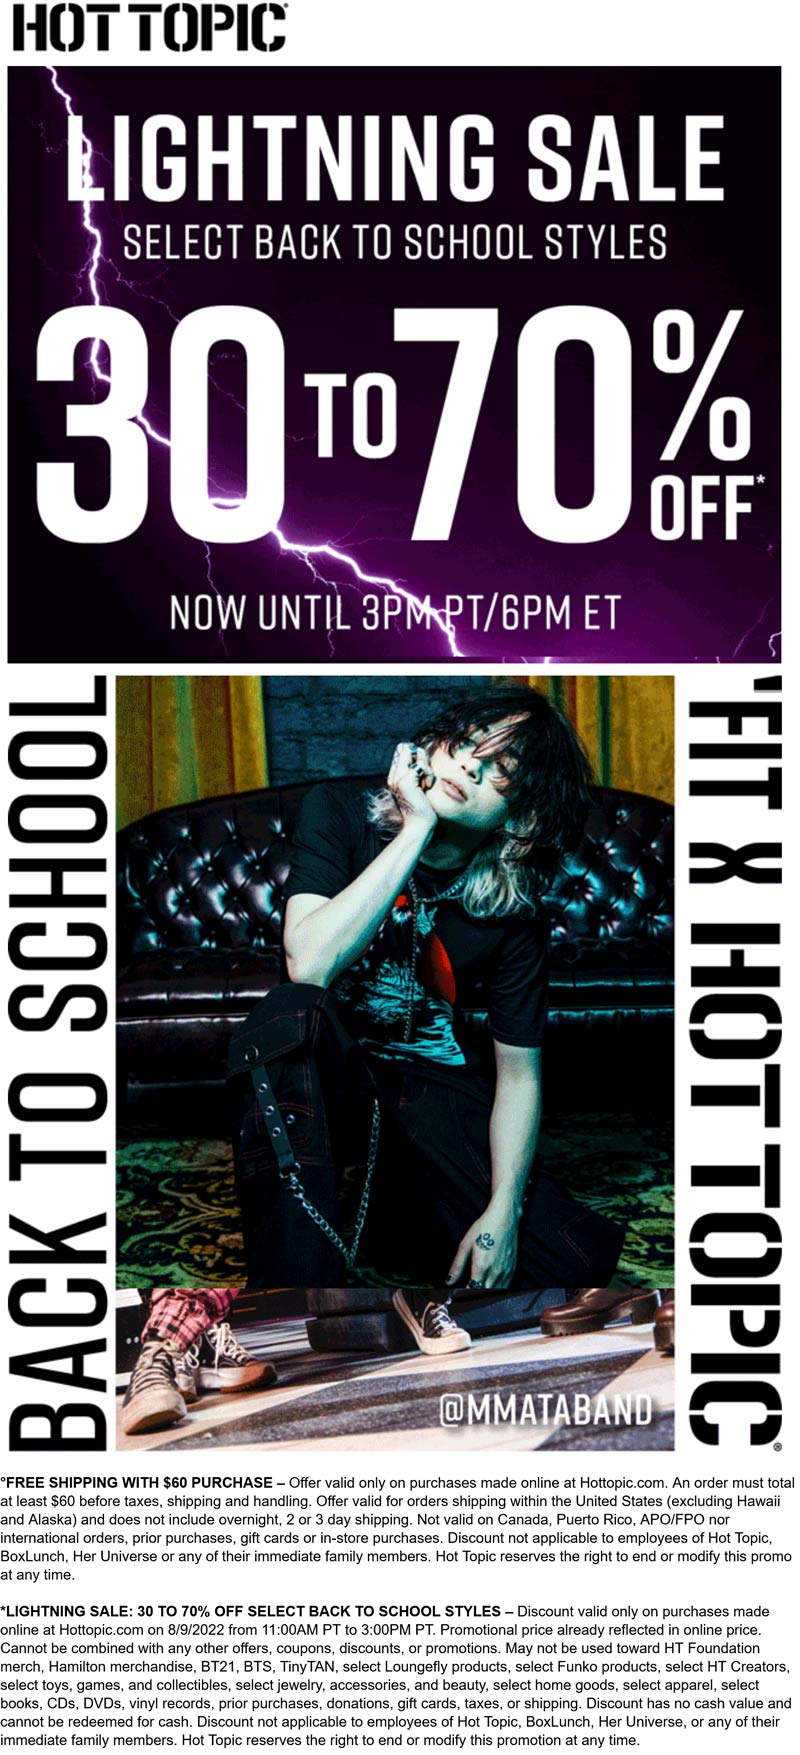 Hot Topic stores Coupon  30-70% off til 6p today online at Hot Topic #hottopic 